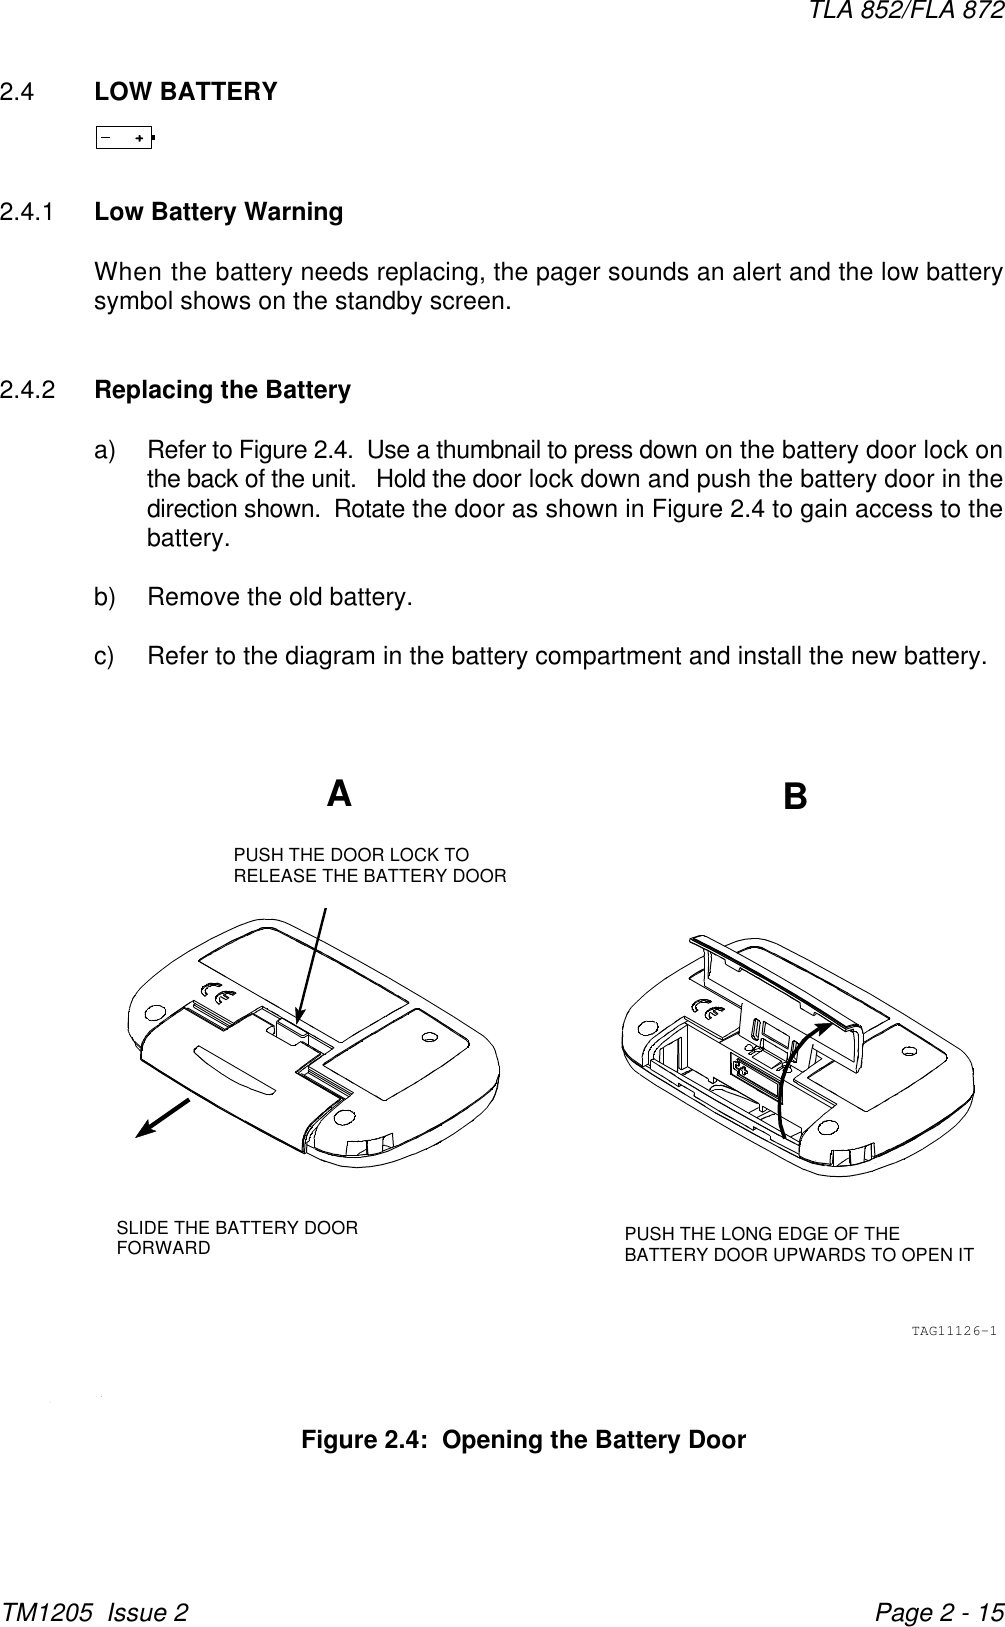 ABPUSH THE LONG EDGE OF THEBATTERY DOOR UPWARDS TO OPEN ITPUSH THE DOOR LOCK TORELEASE THE BATTERY DOORSLIDE THE BATTERY DOORFORWARDTAG11126-1TLA 852/FLA 872TM1205  Issue 2 Page 2 - 15Figure 2.4:  Opening the Battery Door2.4 LOW BATTERY2.4.1 Low Battery WarningWhen the battery needs replacing, the pager sounds an alert and the low batterysymbol shows on the standby screen.  2.4.2 Replacing the Batterya) Refer to Figure 2.4.  Use a thumbnail to press down on the battery door lock onthe back of the unit.   Hold the door lock down and push the battery door in thedirection shown.  Rotate the door as shown in Figure 2.4 to gain access to thebattery.b) Remove the old battery.c) Refer to the diagram in the battery compartment and install the new battery.